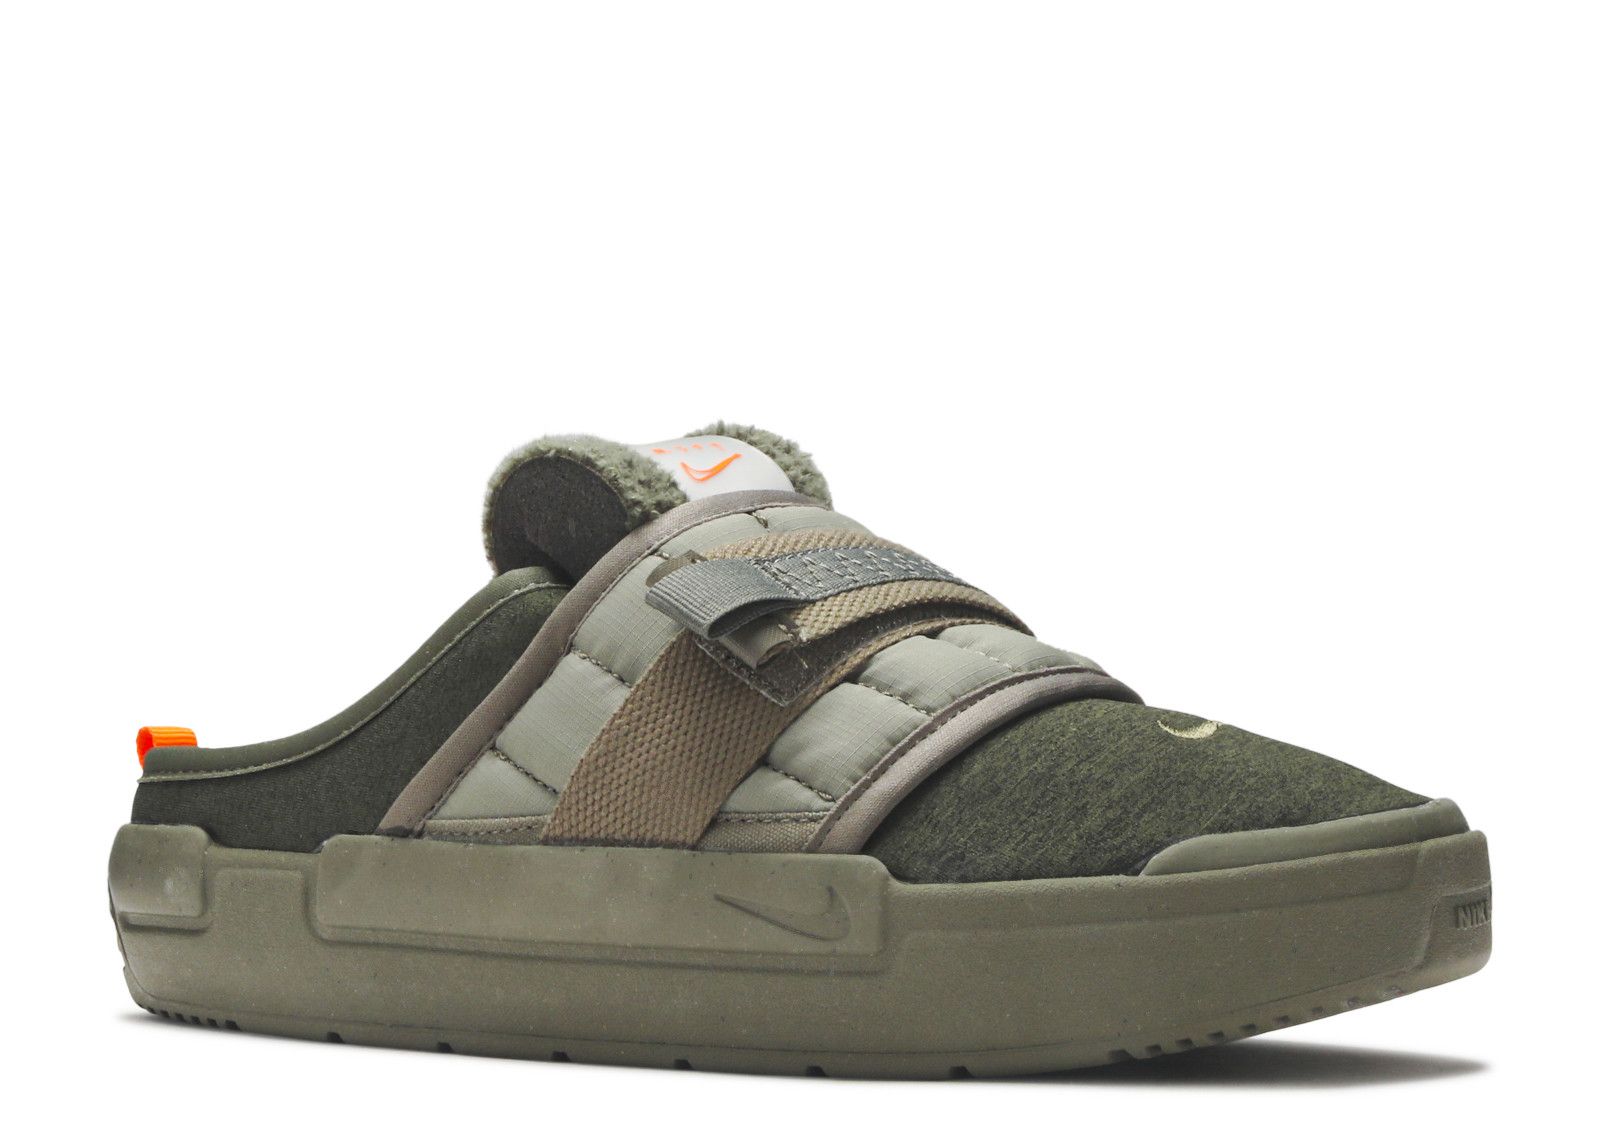 Offline Slip On 'Army Olive' - Nike - CT2951 300 - army olive/total ...